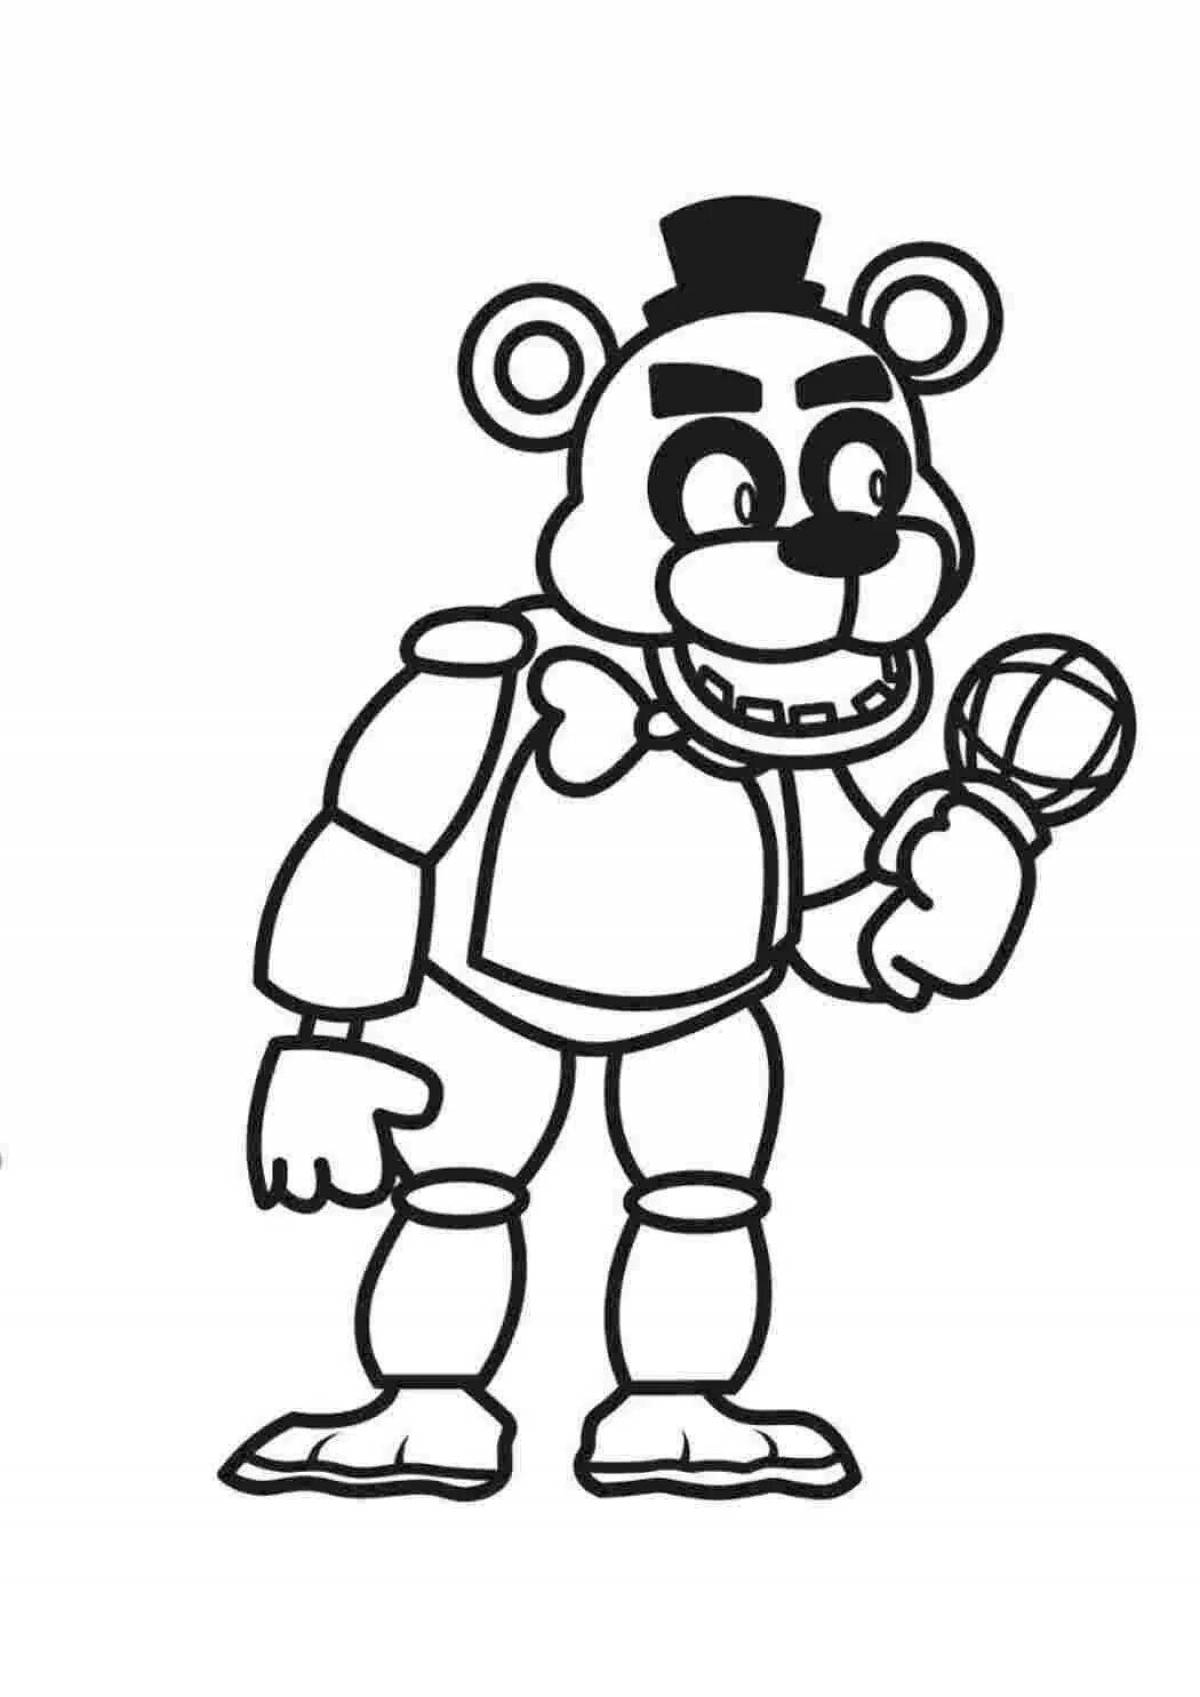 Freddy's colorful coloring page